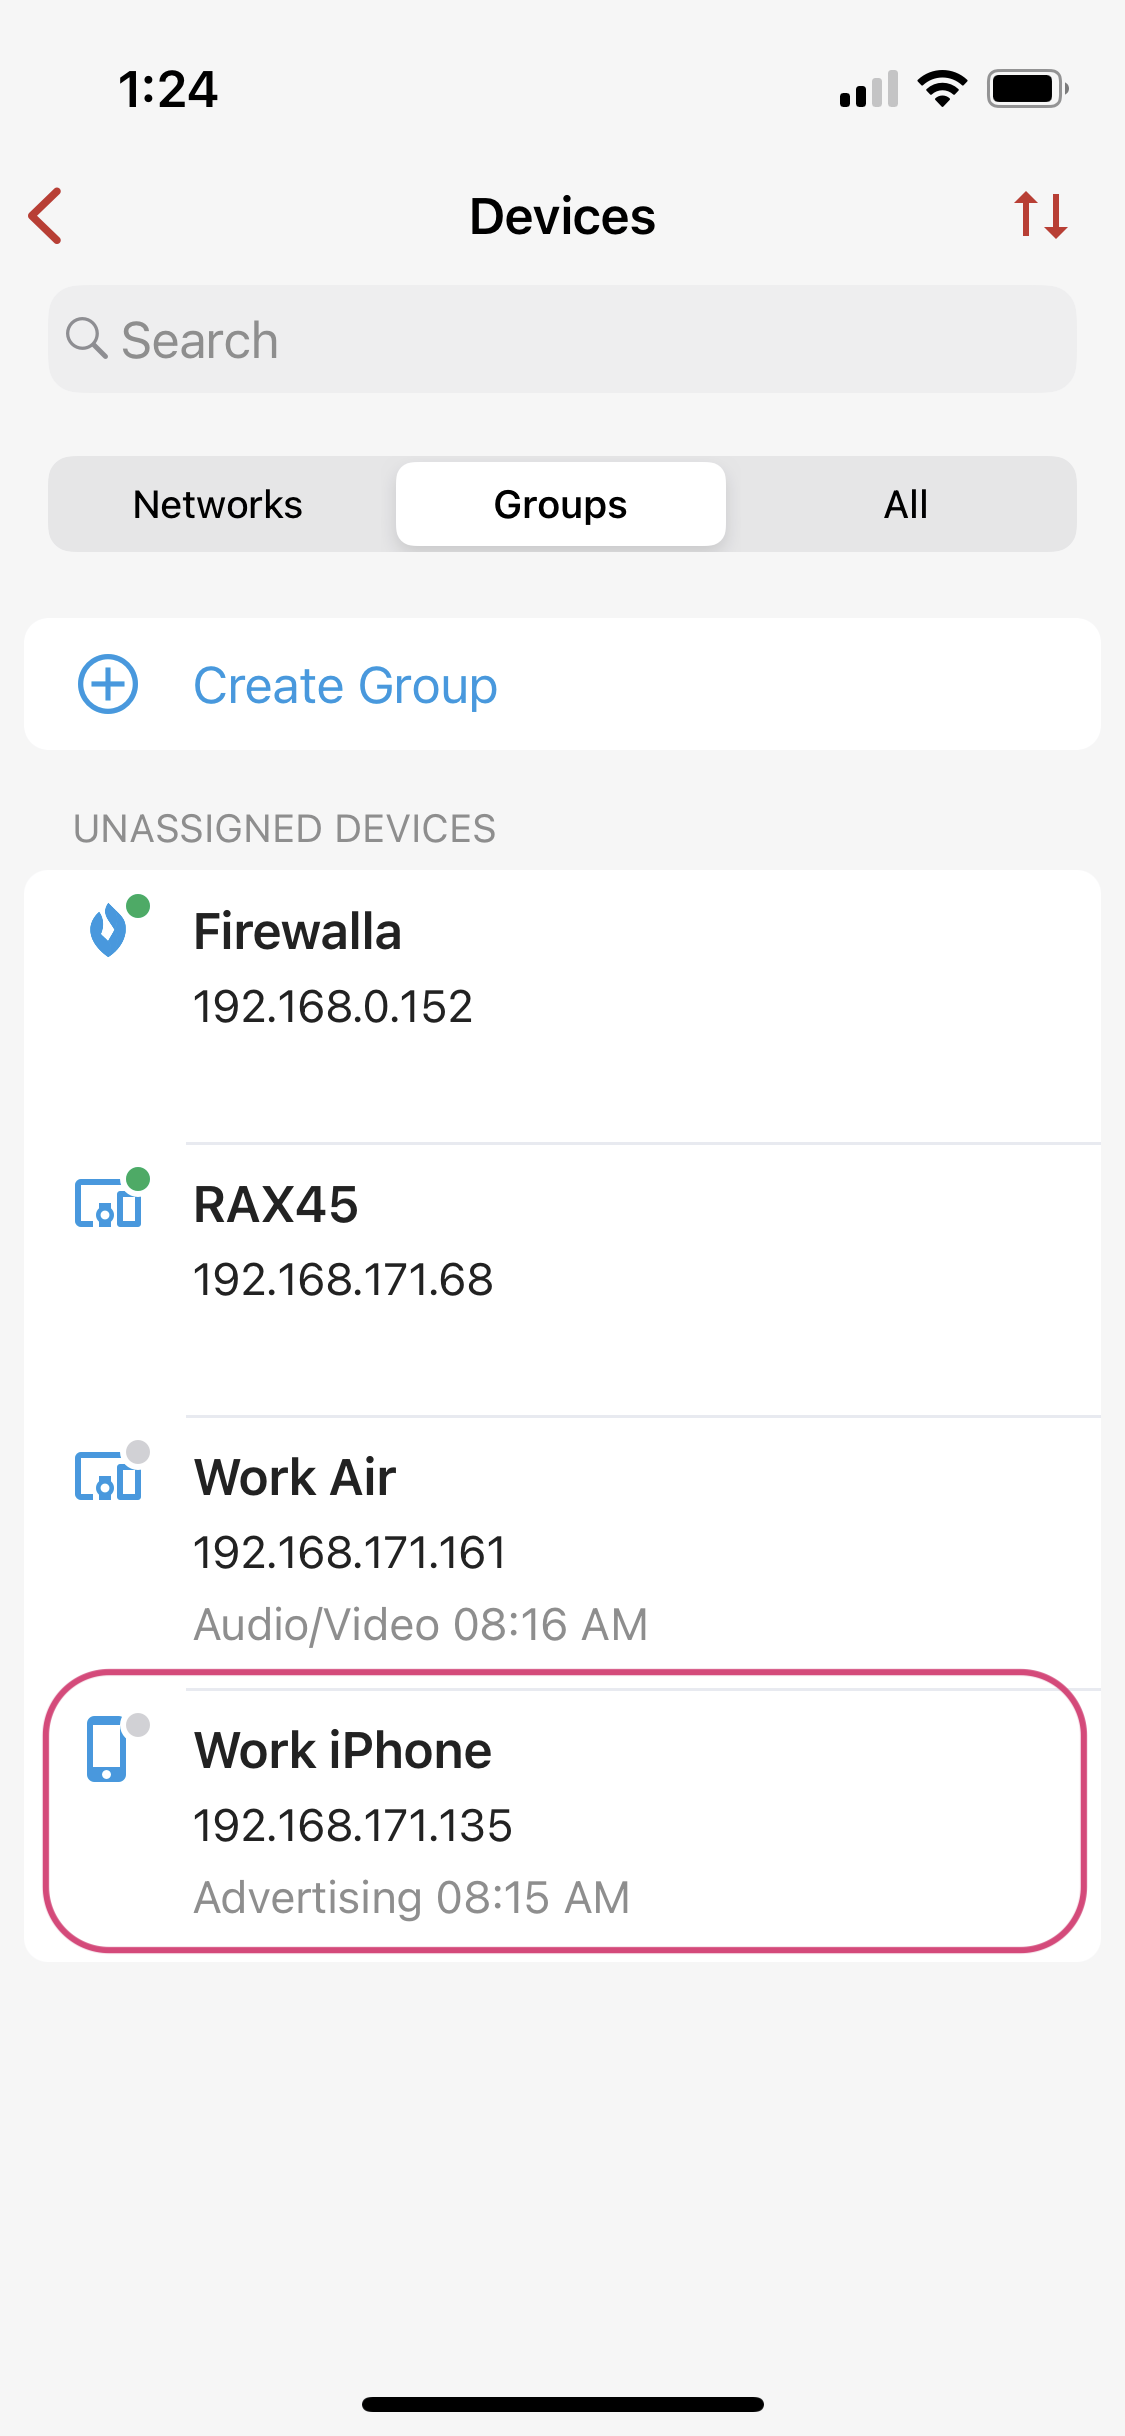 Firewalla connected device list reflects the changes